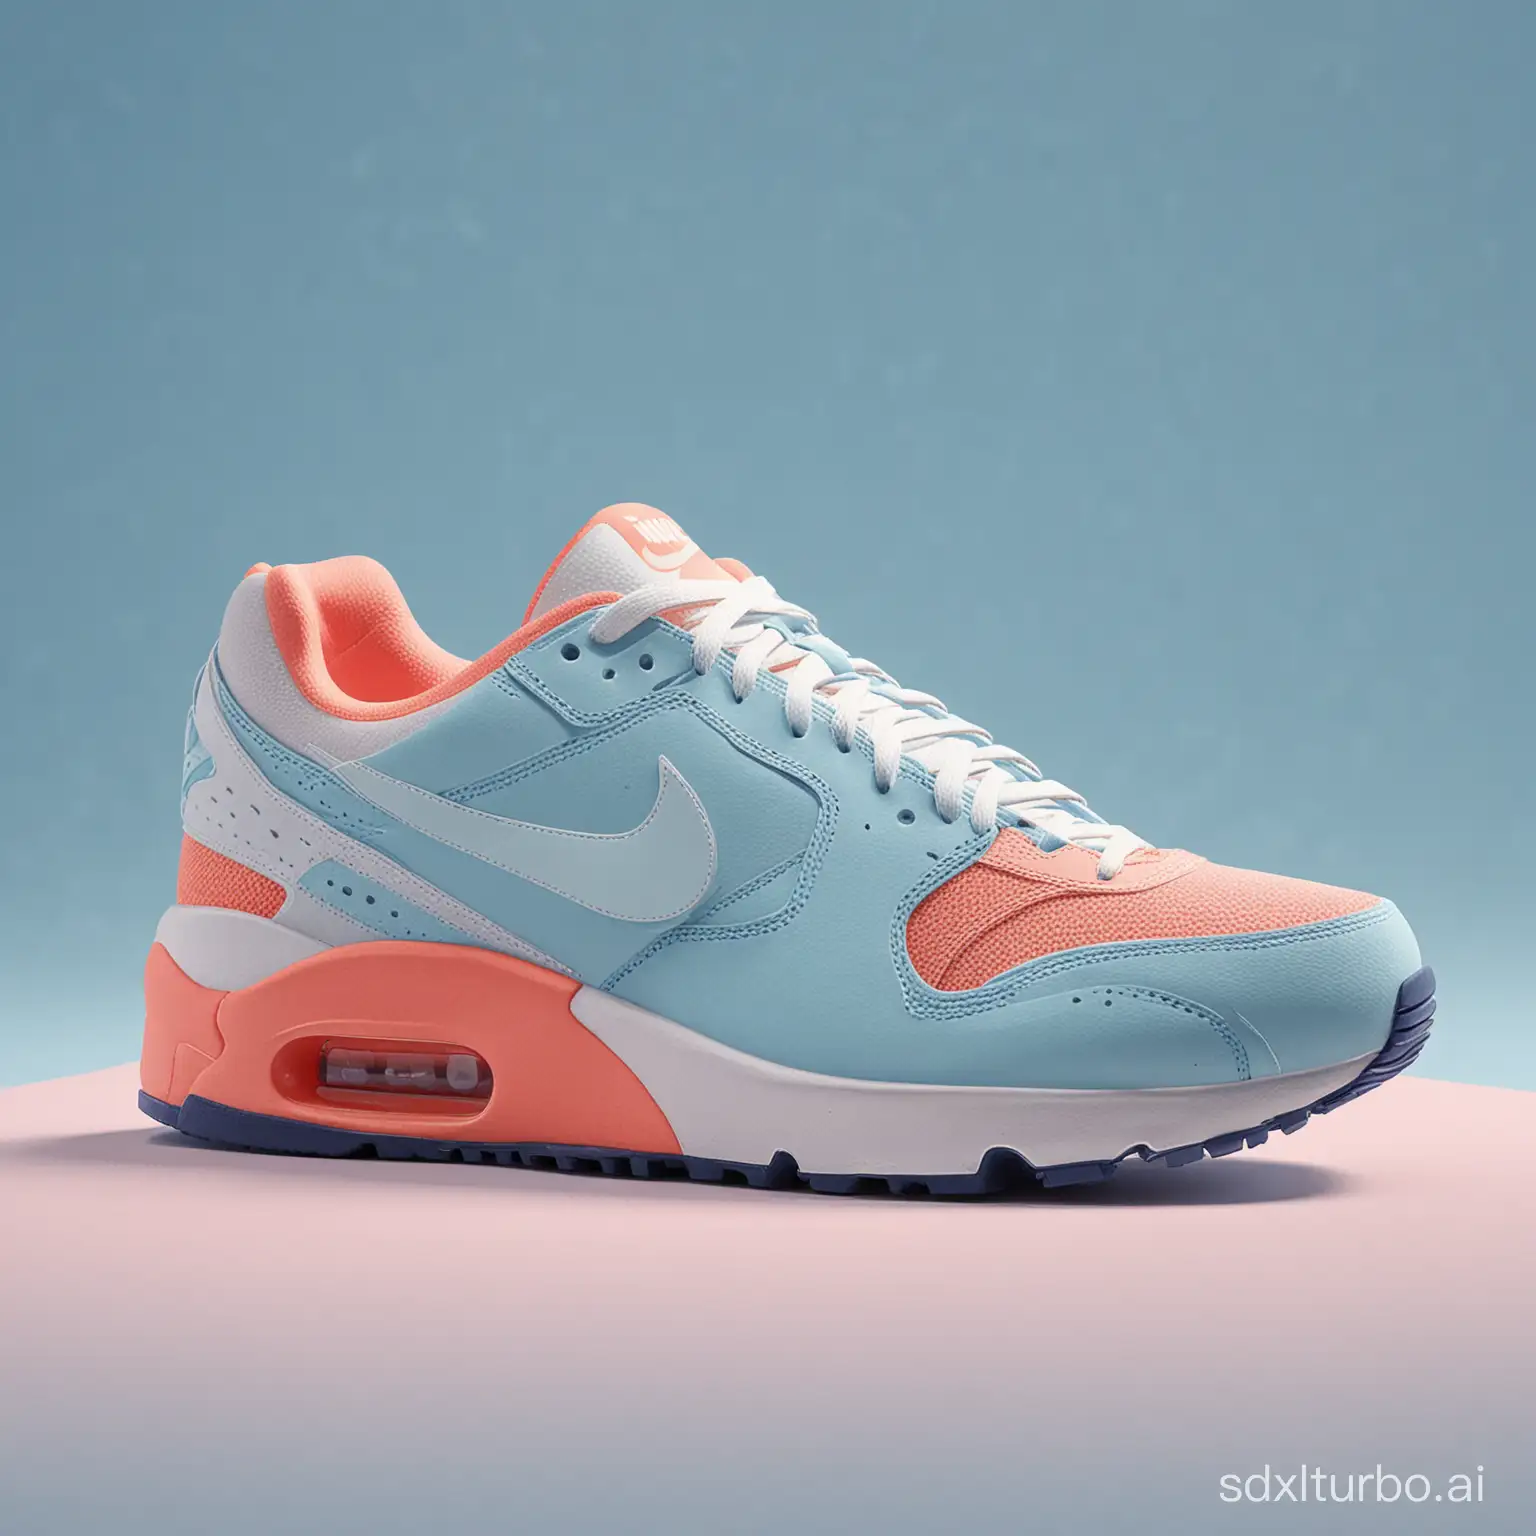 Product shot of Nike shoes, with soft
vibrant colors, 3D Blender render, modular
constructivism, blue background,
physically based rendering, centered